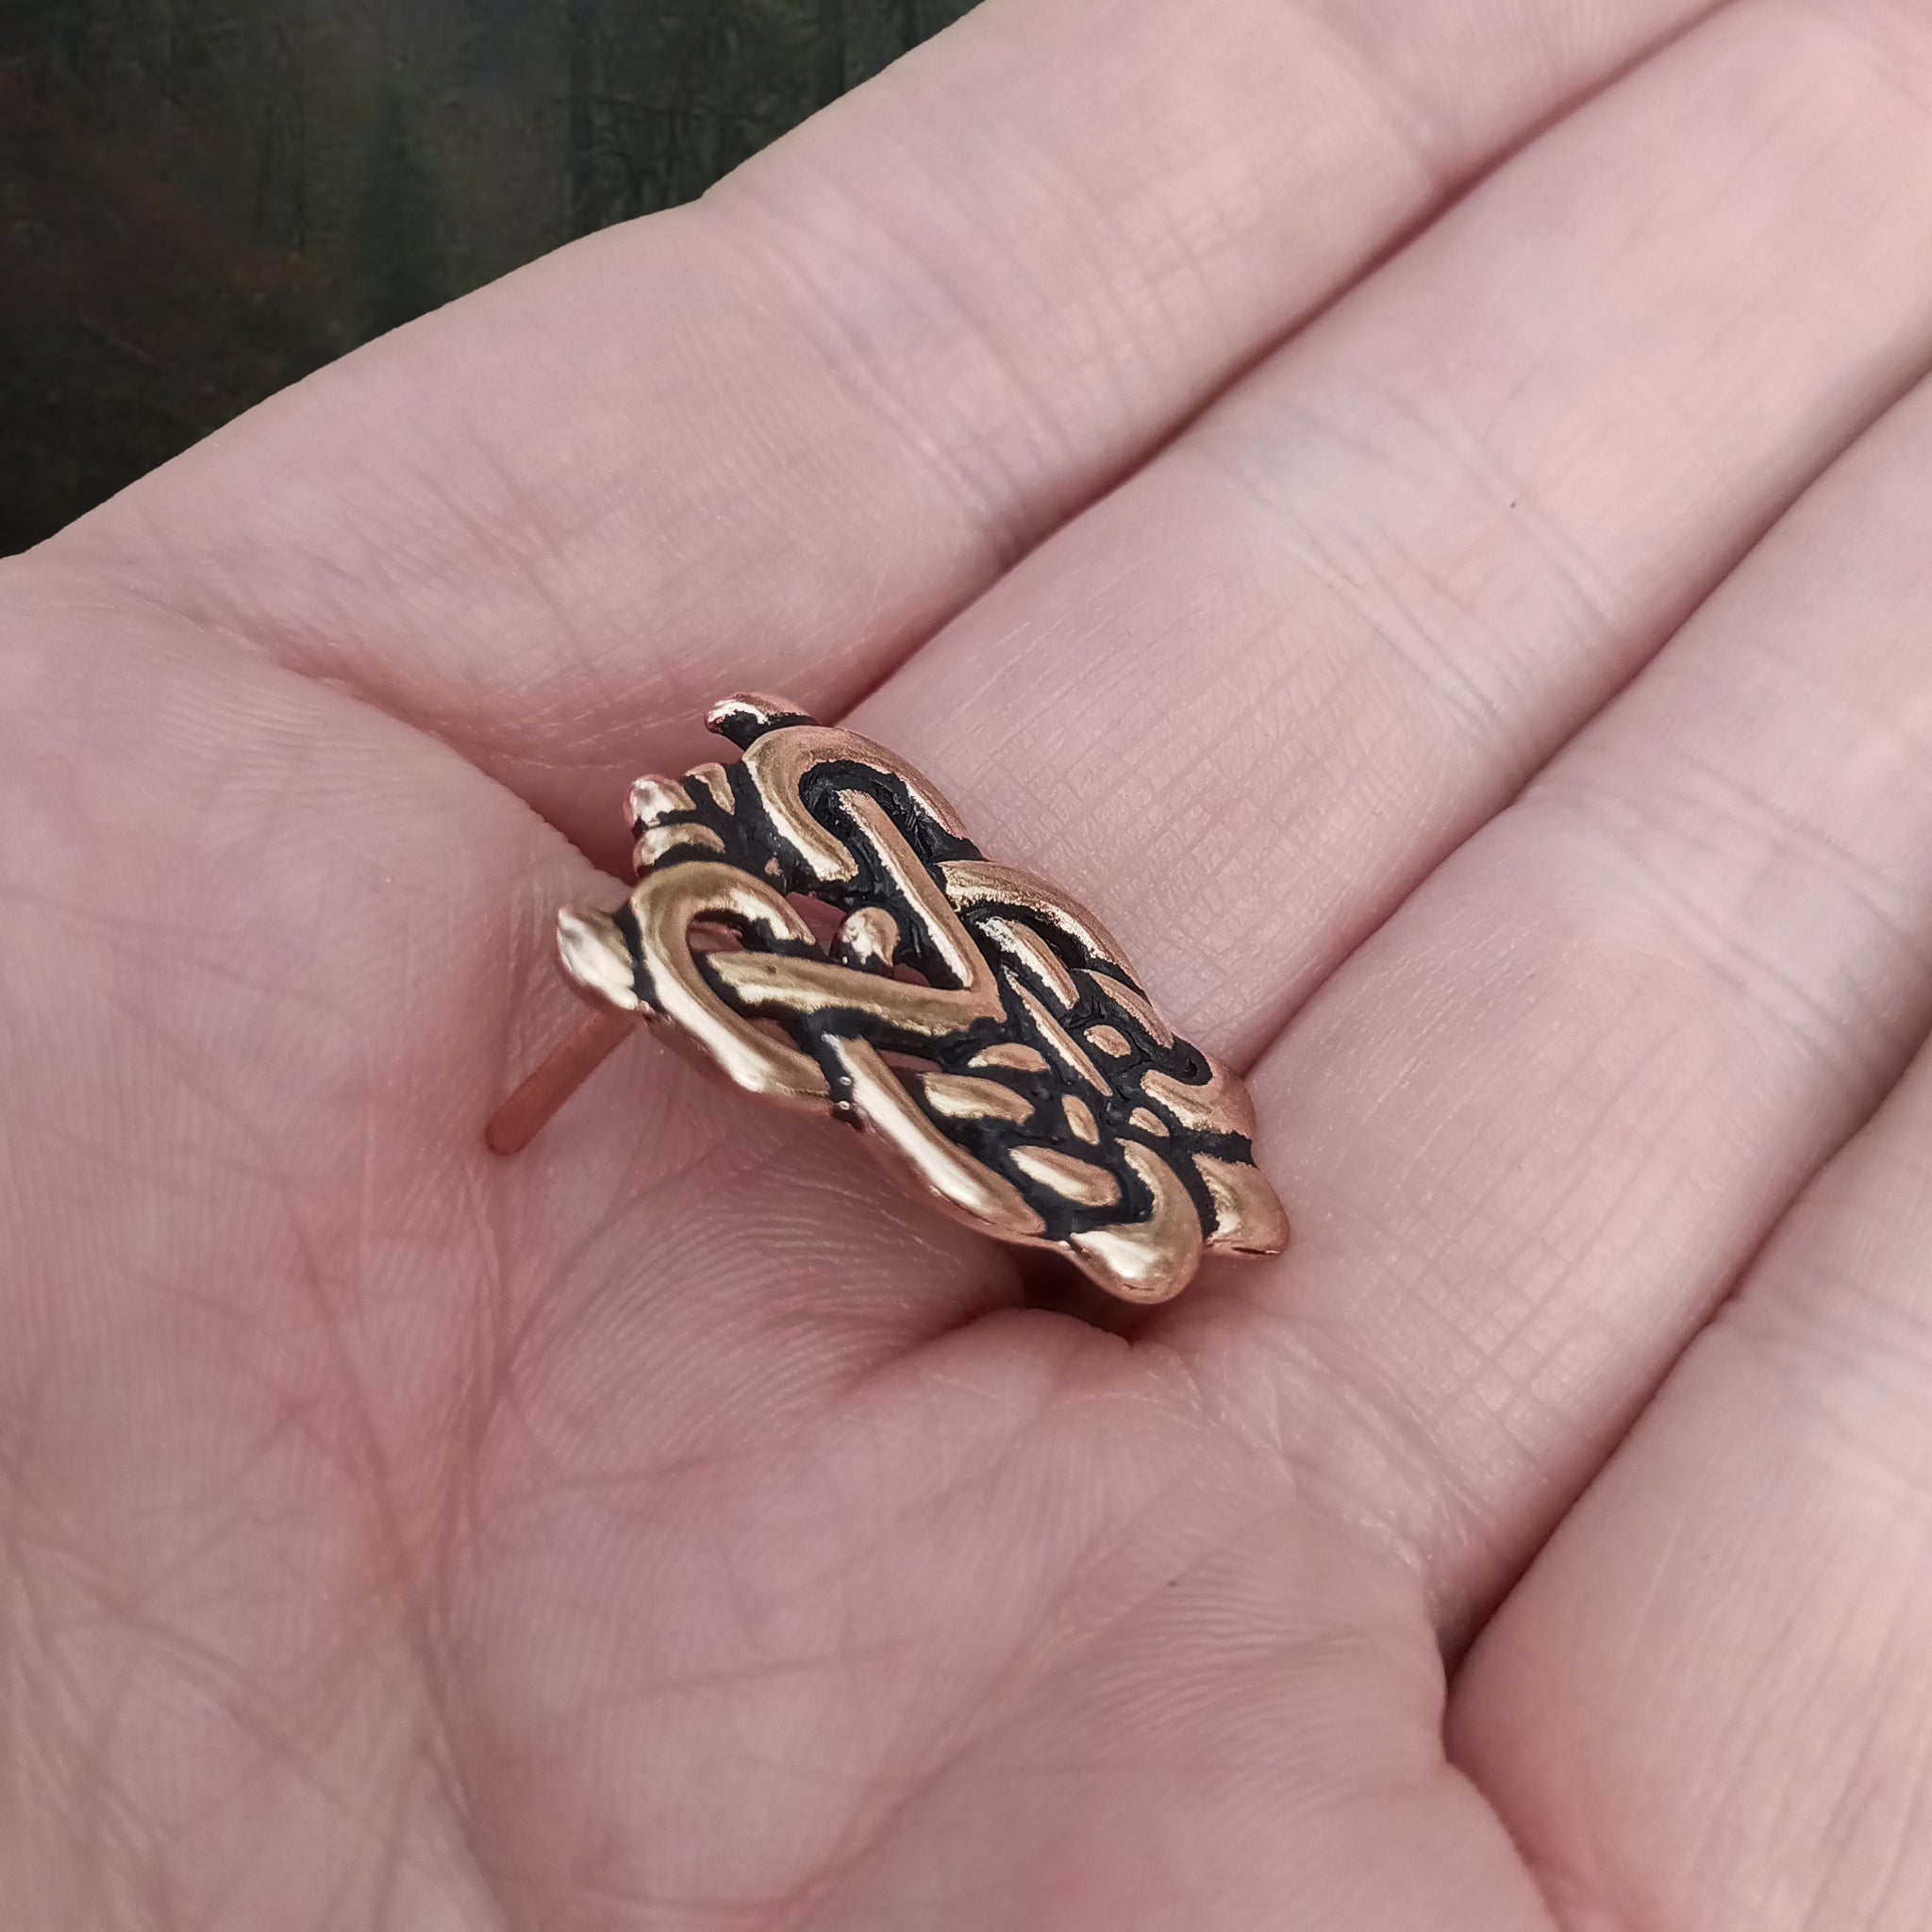 Bronze Ringerike Style Knotwork Viking Strap End on Hand - Side Angle View